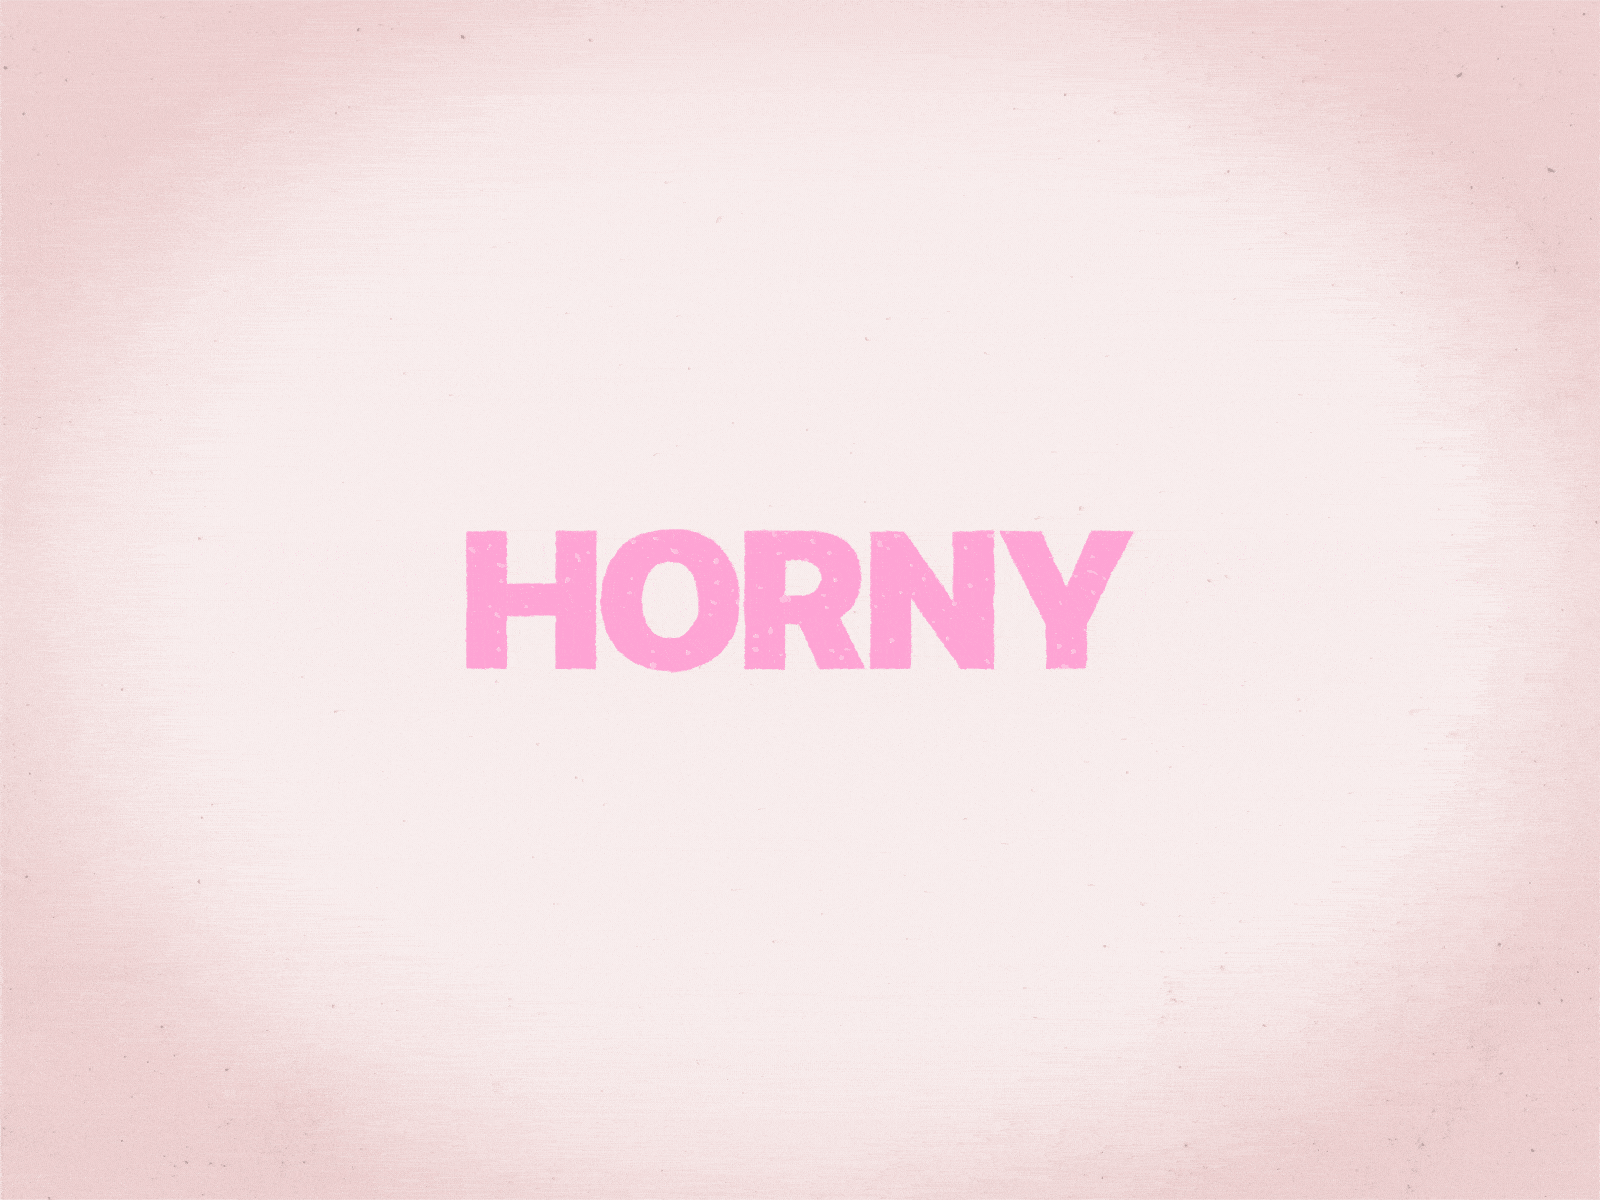 Horny after effects animation design lettering motion